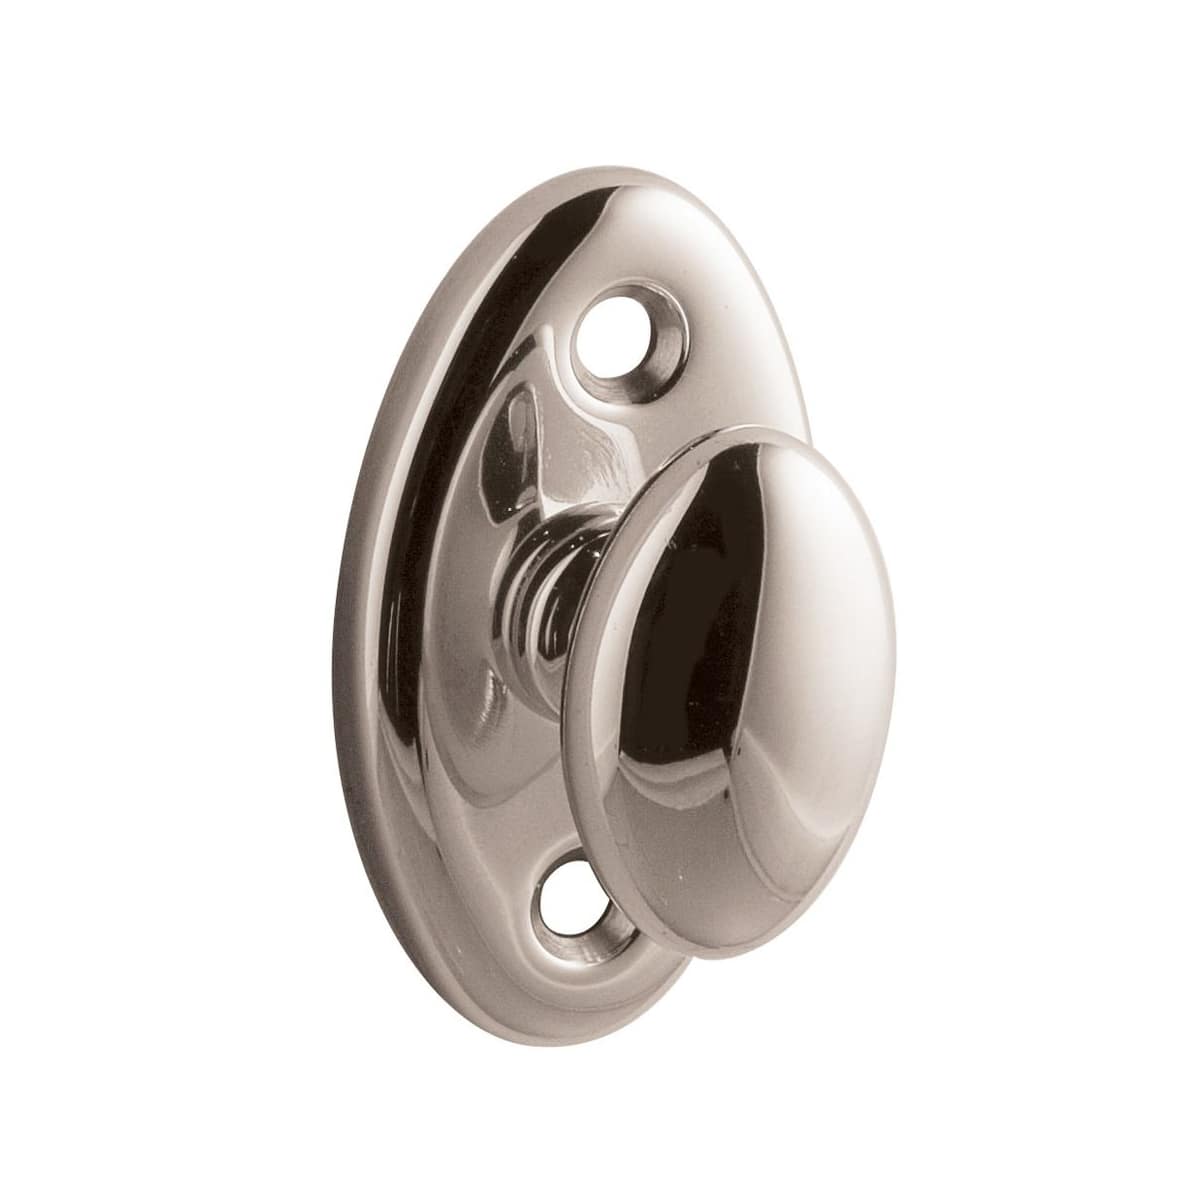 Baldwin 6751 Interior and Entrance Thumb turn Lock with Backplate for 2-1/4 Doo Lifetime Polished Brass 6751003